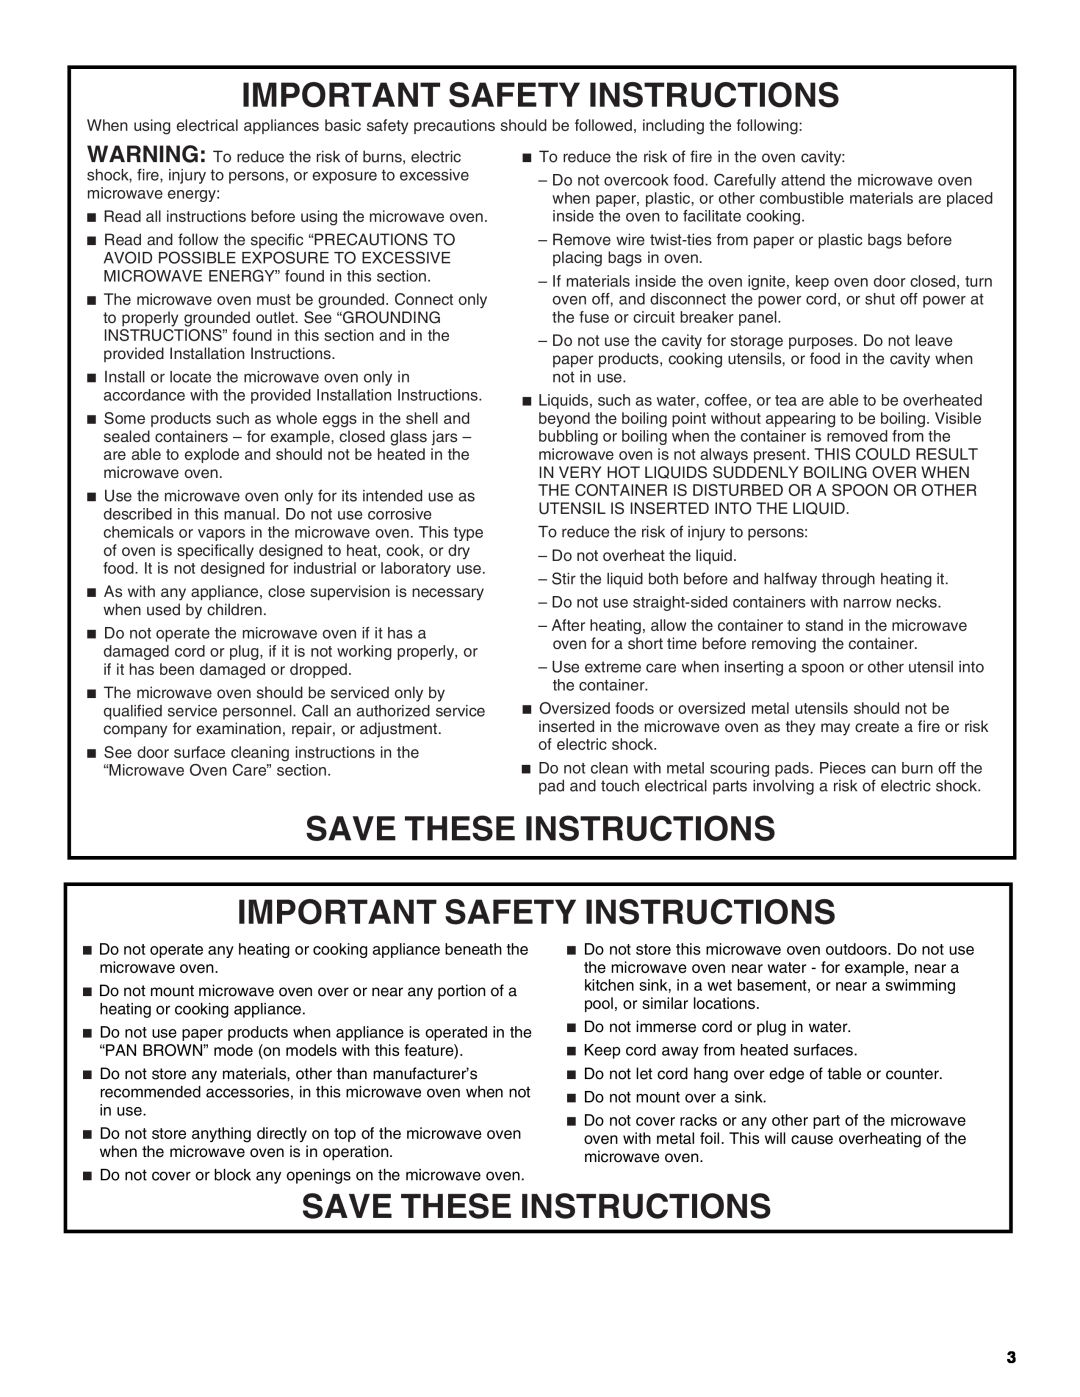 Whirlpool MT4078 manual Save These Instructions Important Safety Instructions 